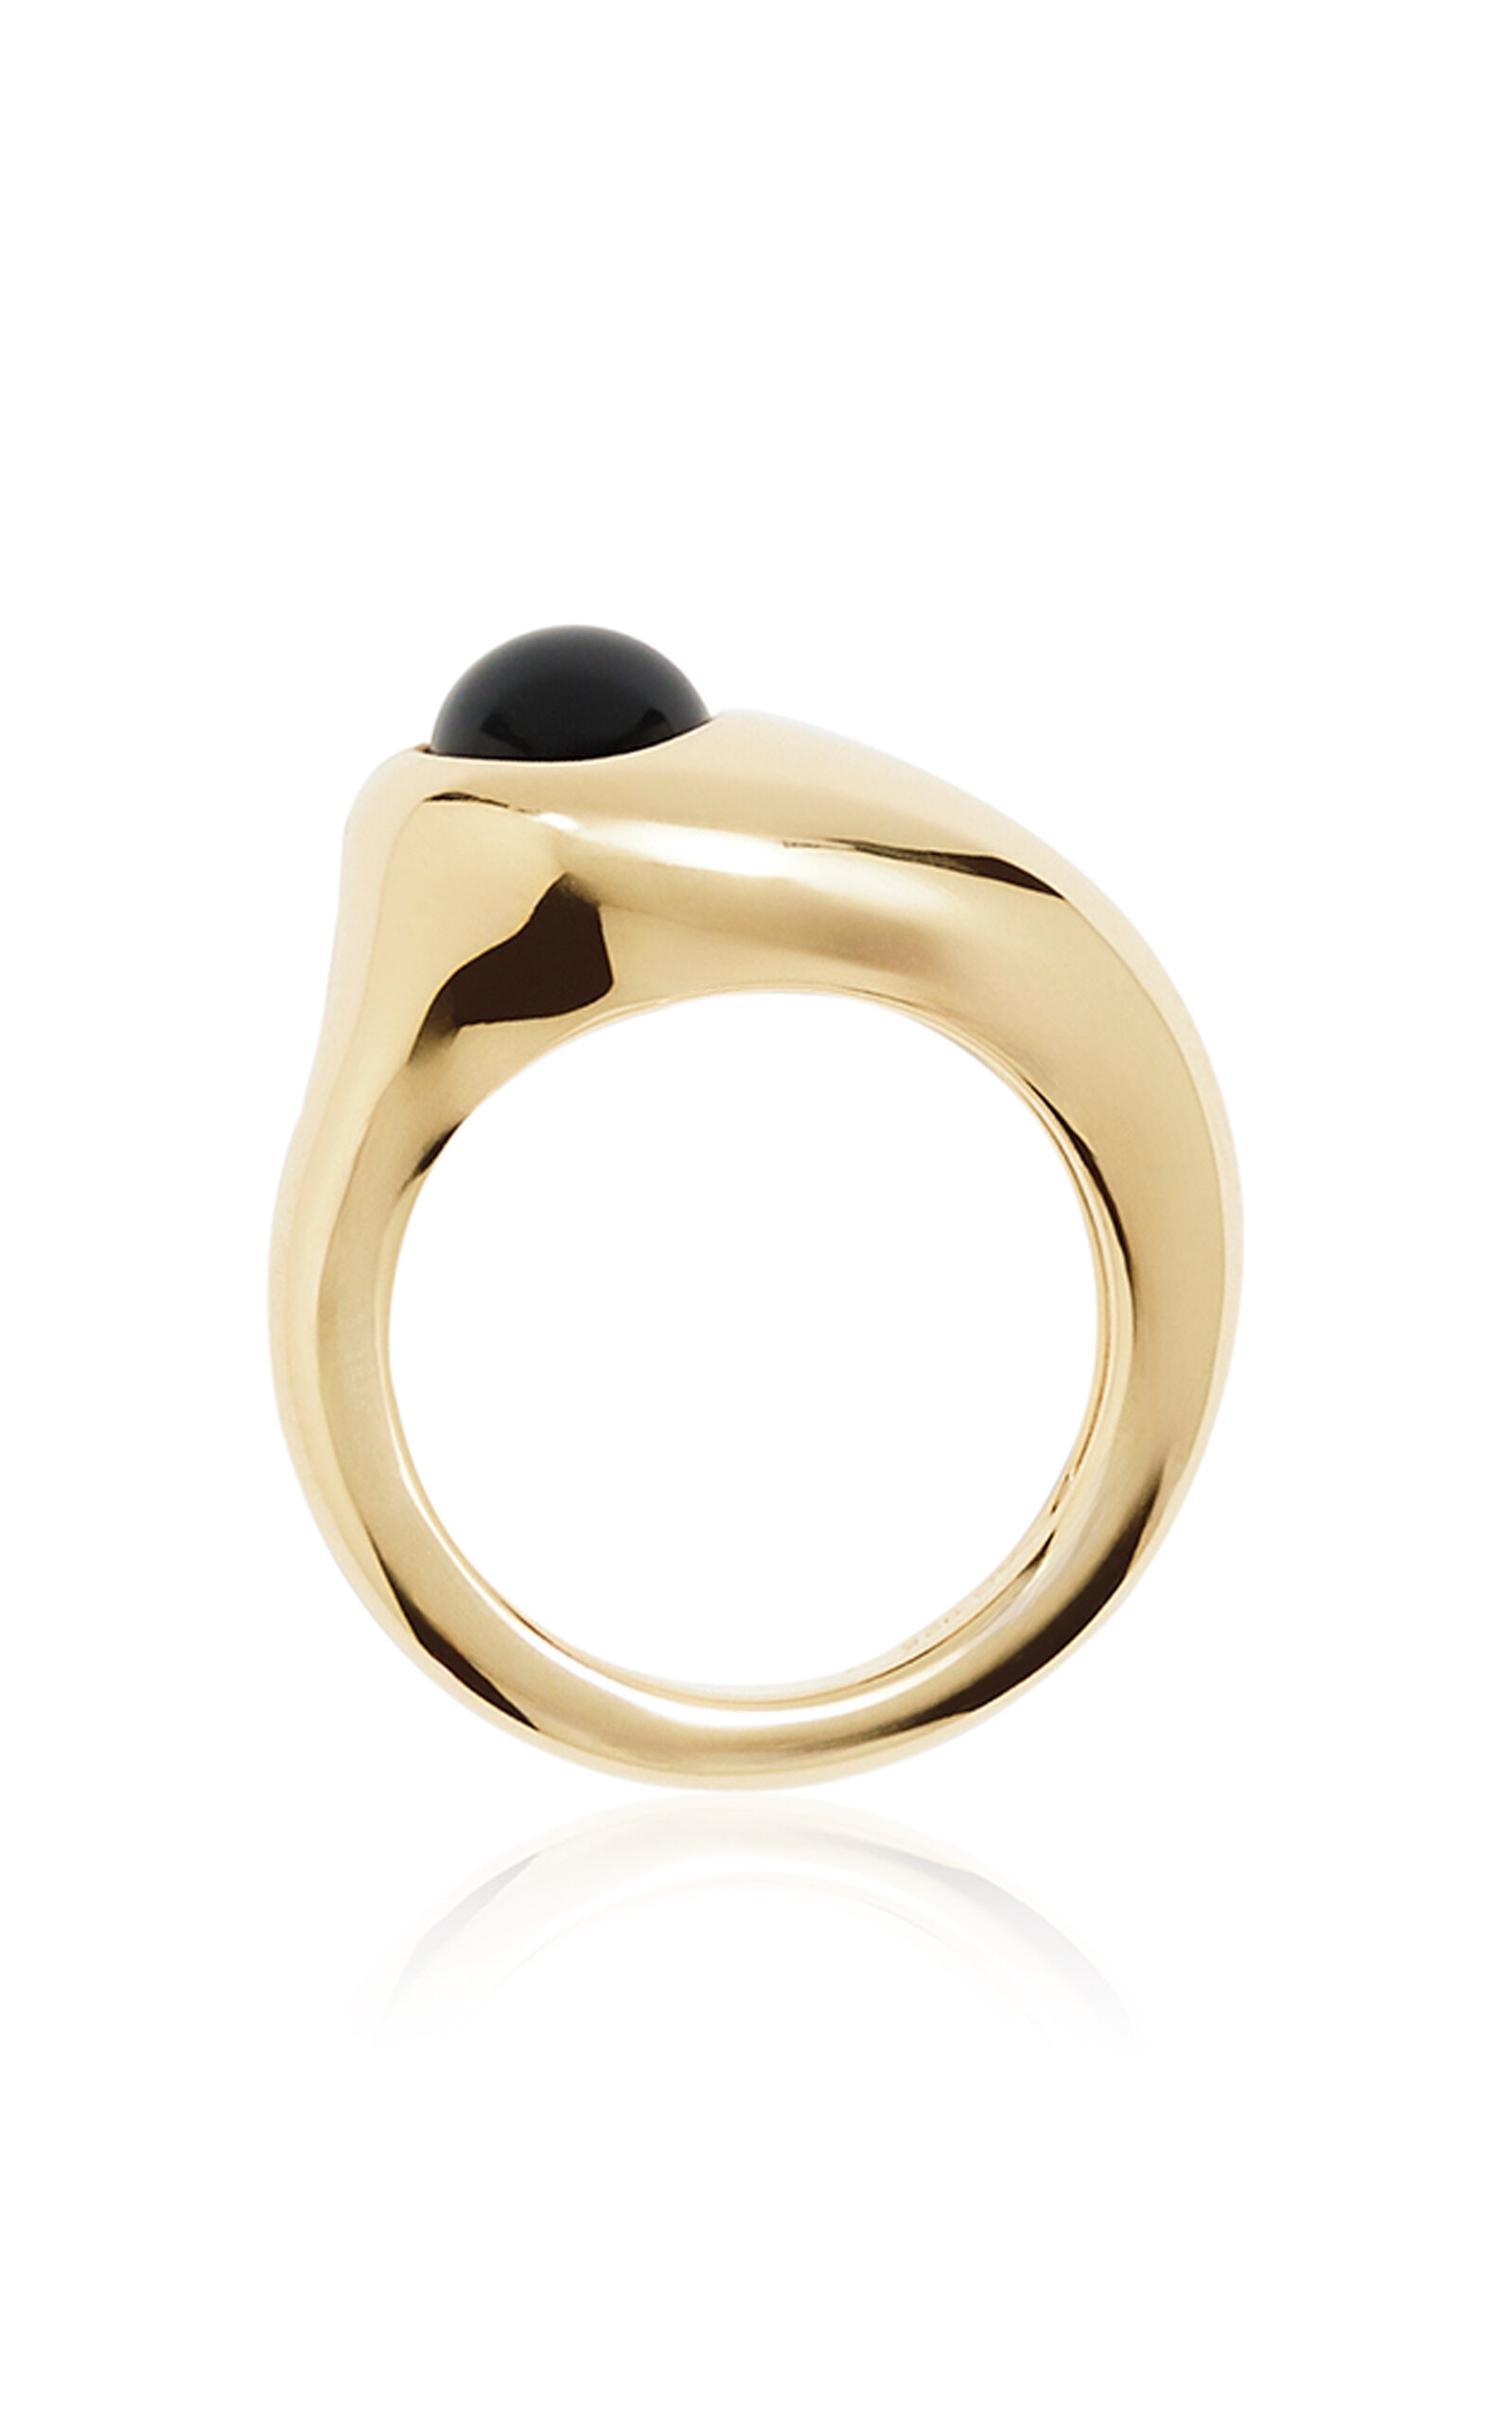 Dualism Black Onyx 18k Gold-Plated Ring